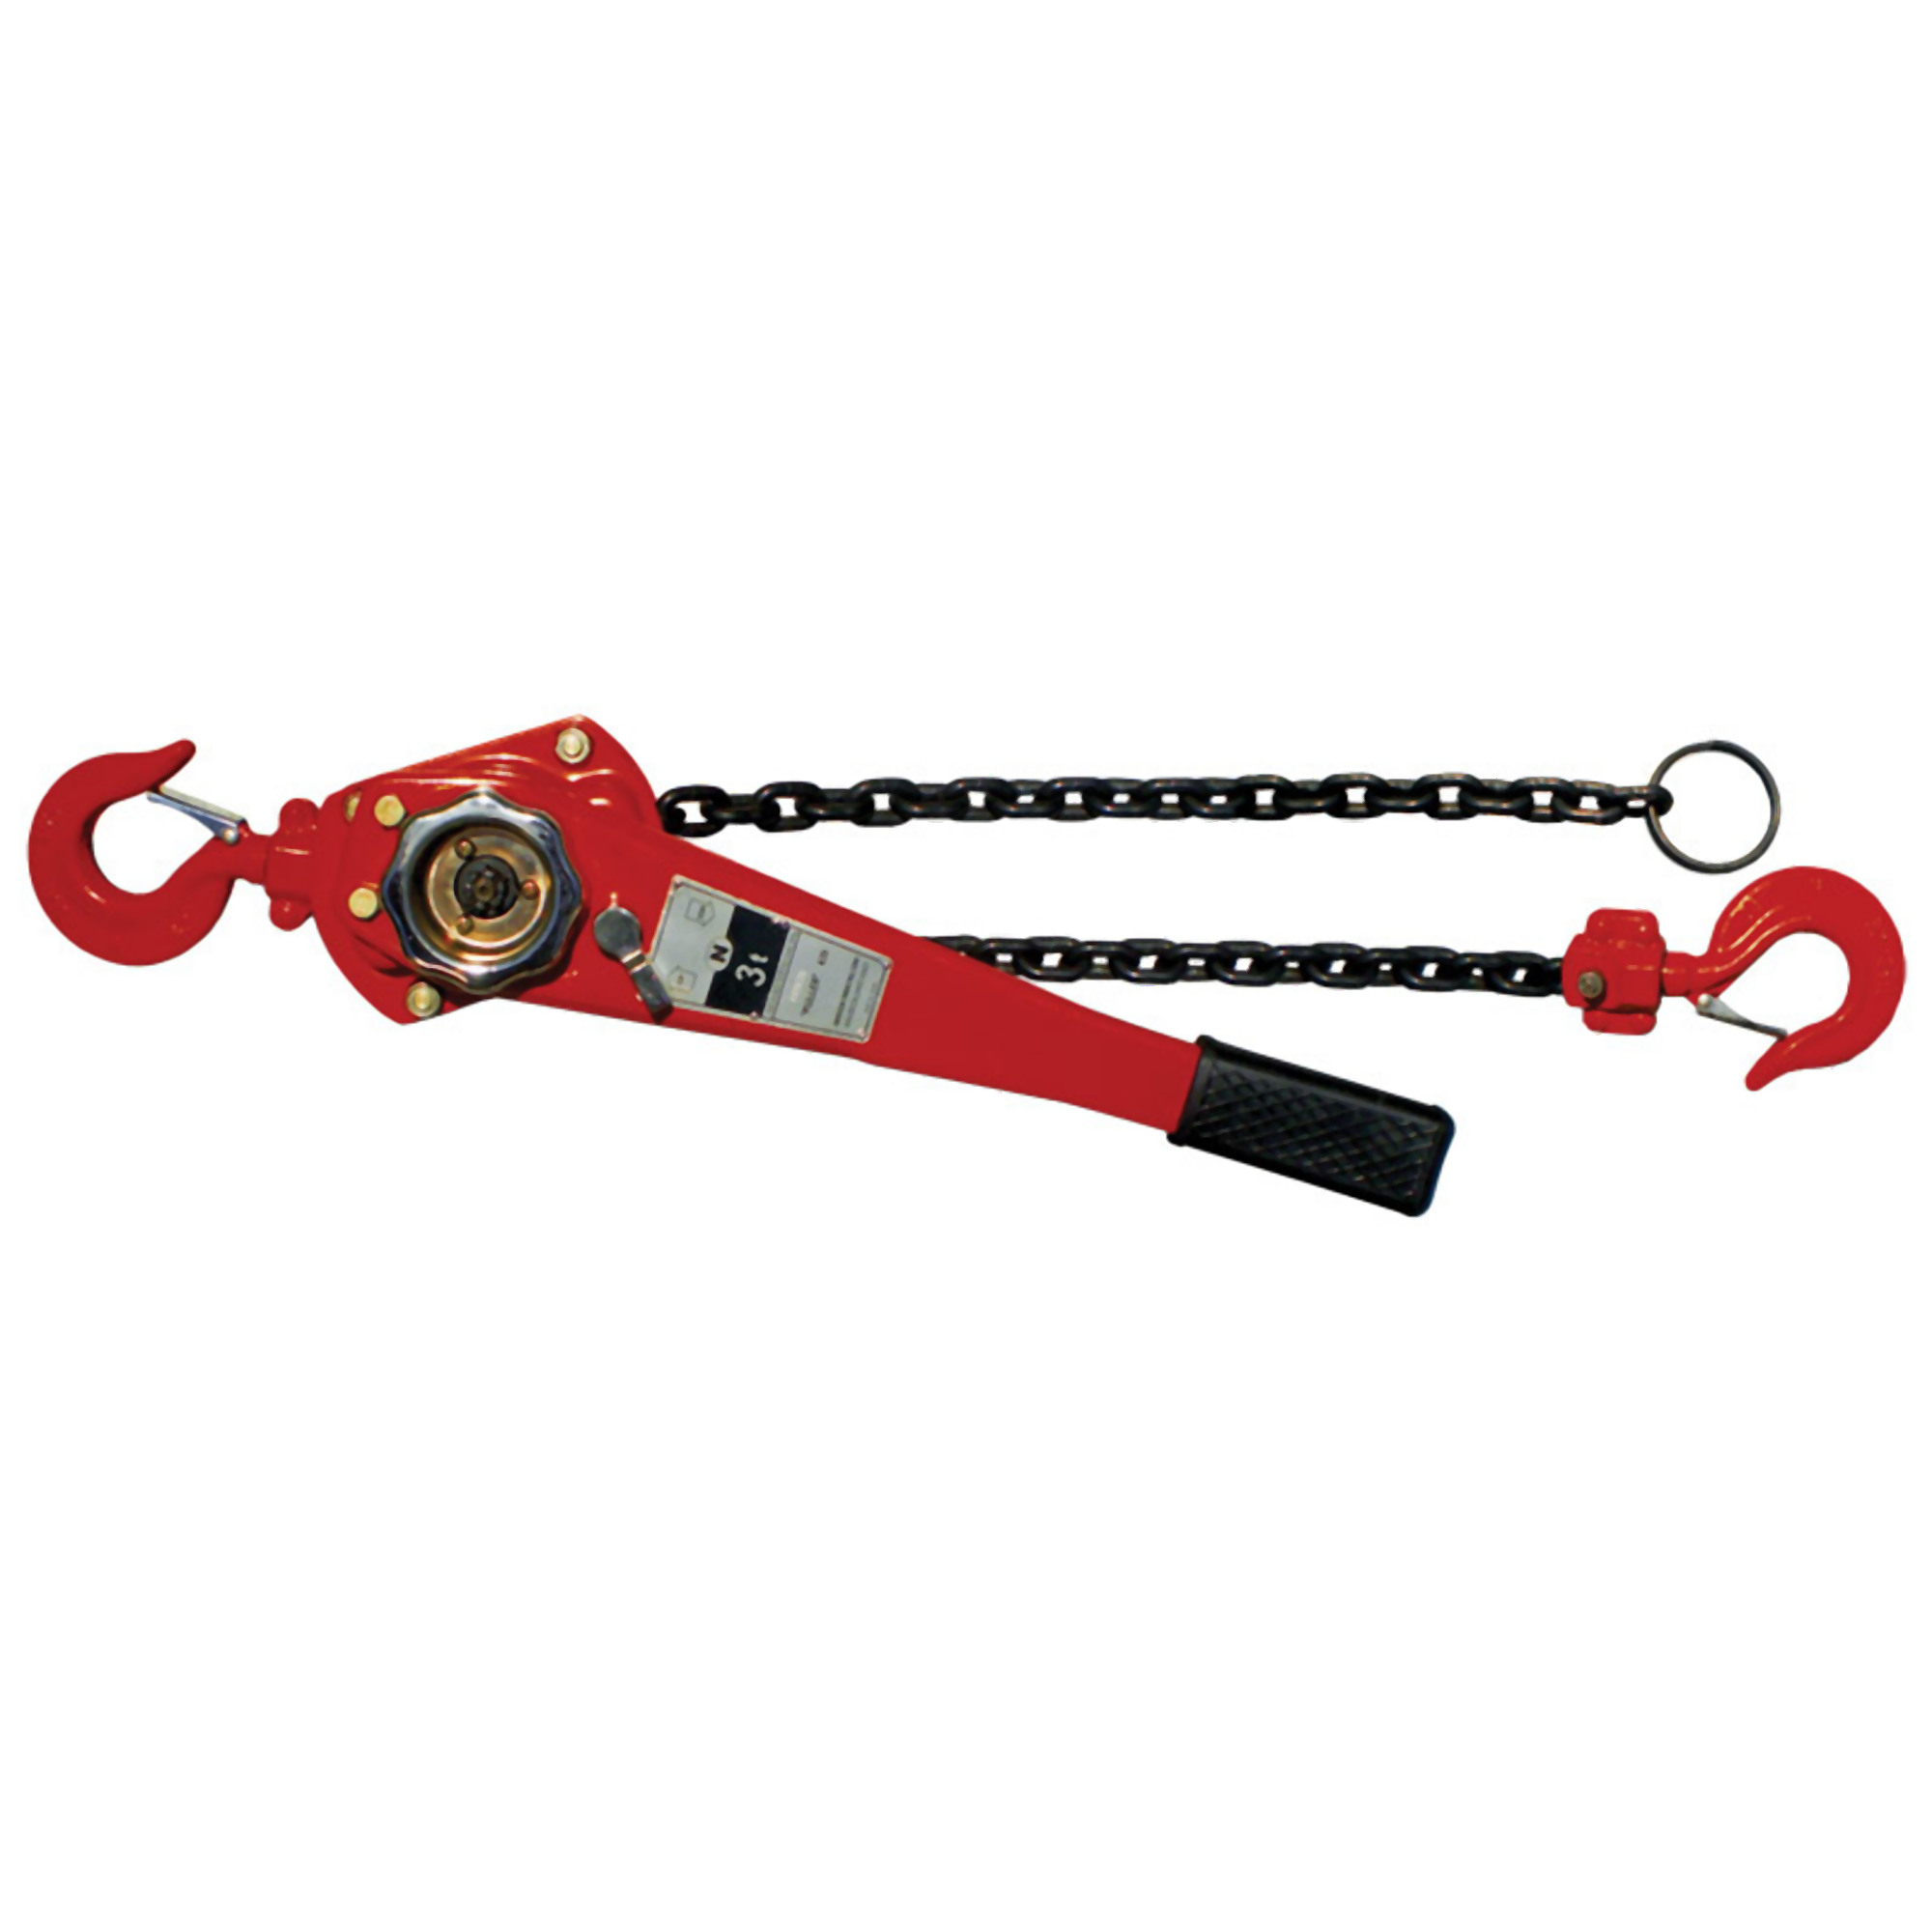 3 ton chain puller, Power Source Manual Lever, Capacity 6000 lb, Lift Height 5 ft, Model - American Power Pull 635